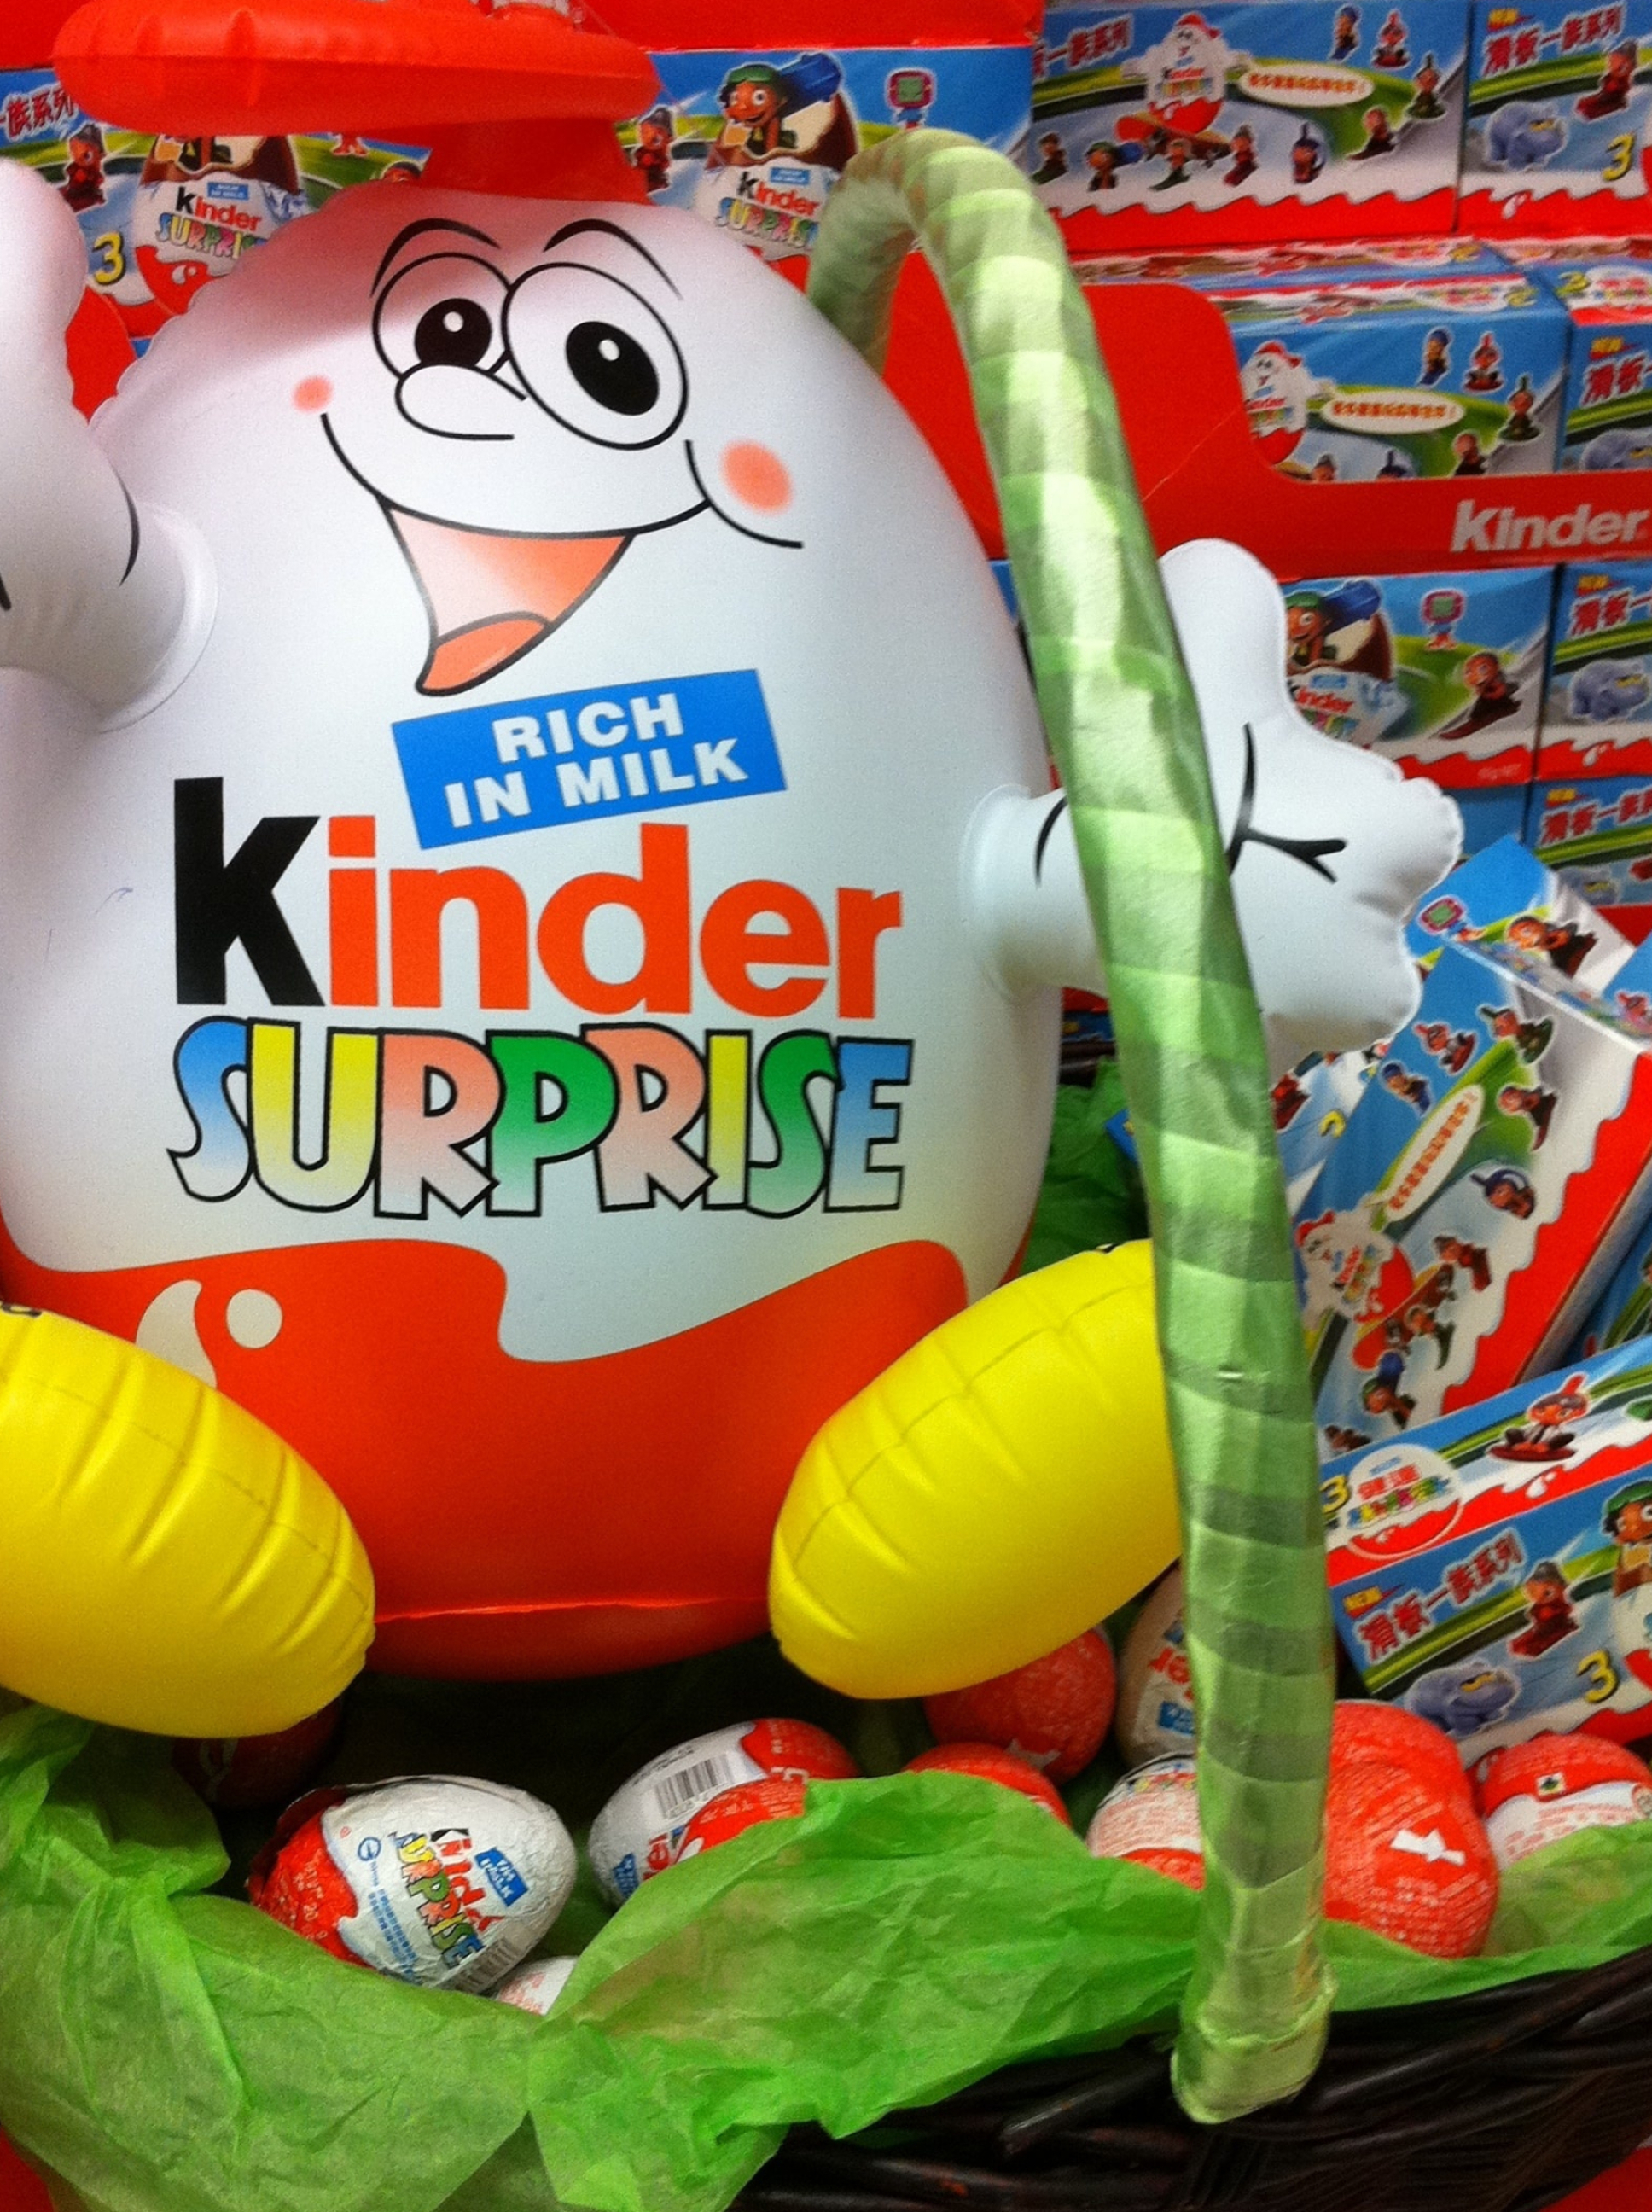 Kinder (Brand): A chocolate egg, Manufactured by Ferrero since 1974. 1940x2600 HD Background.